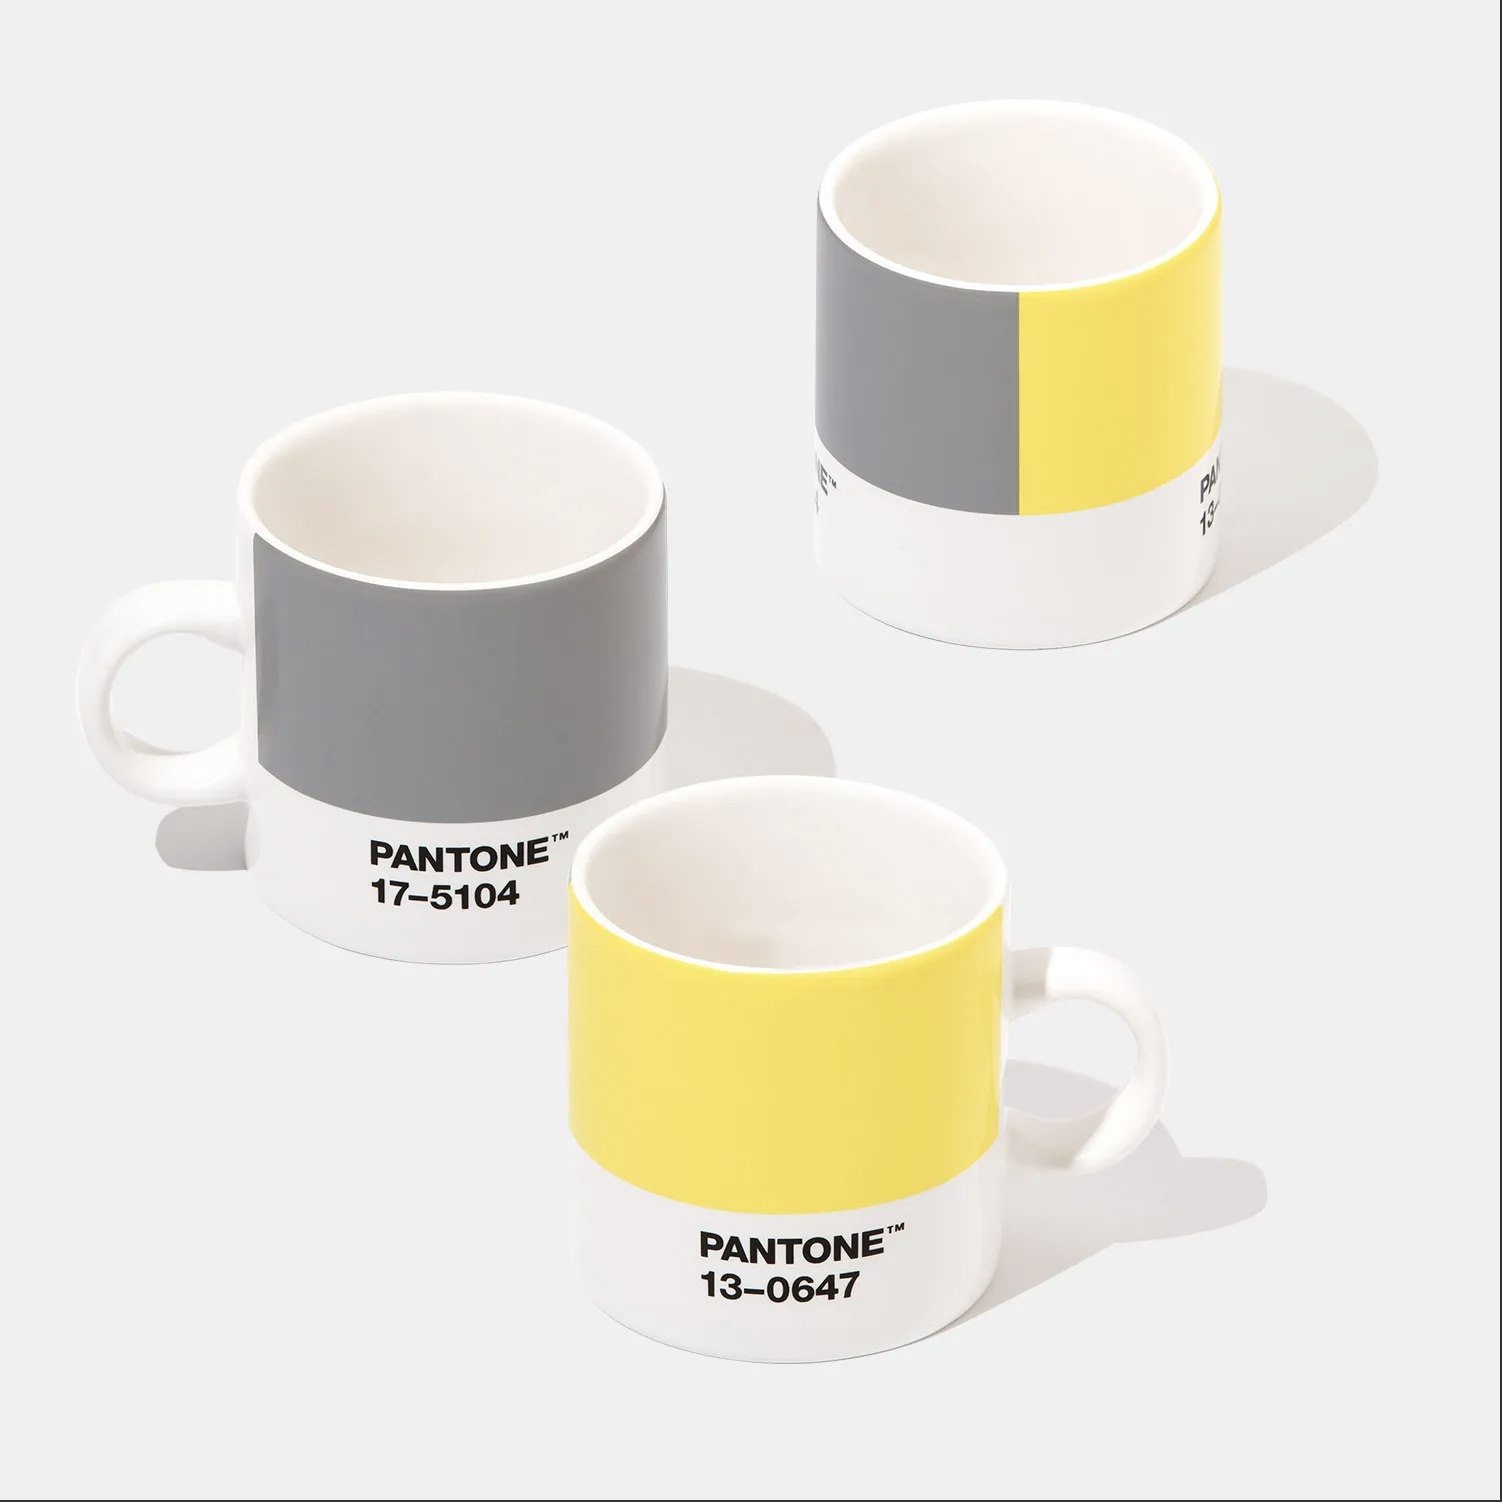 Pantone Colour of the Year 2021 espresso cups